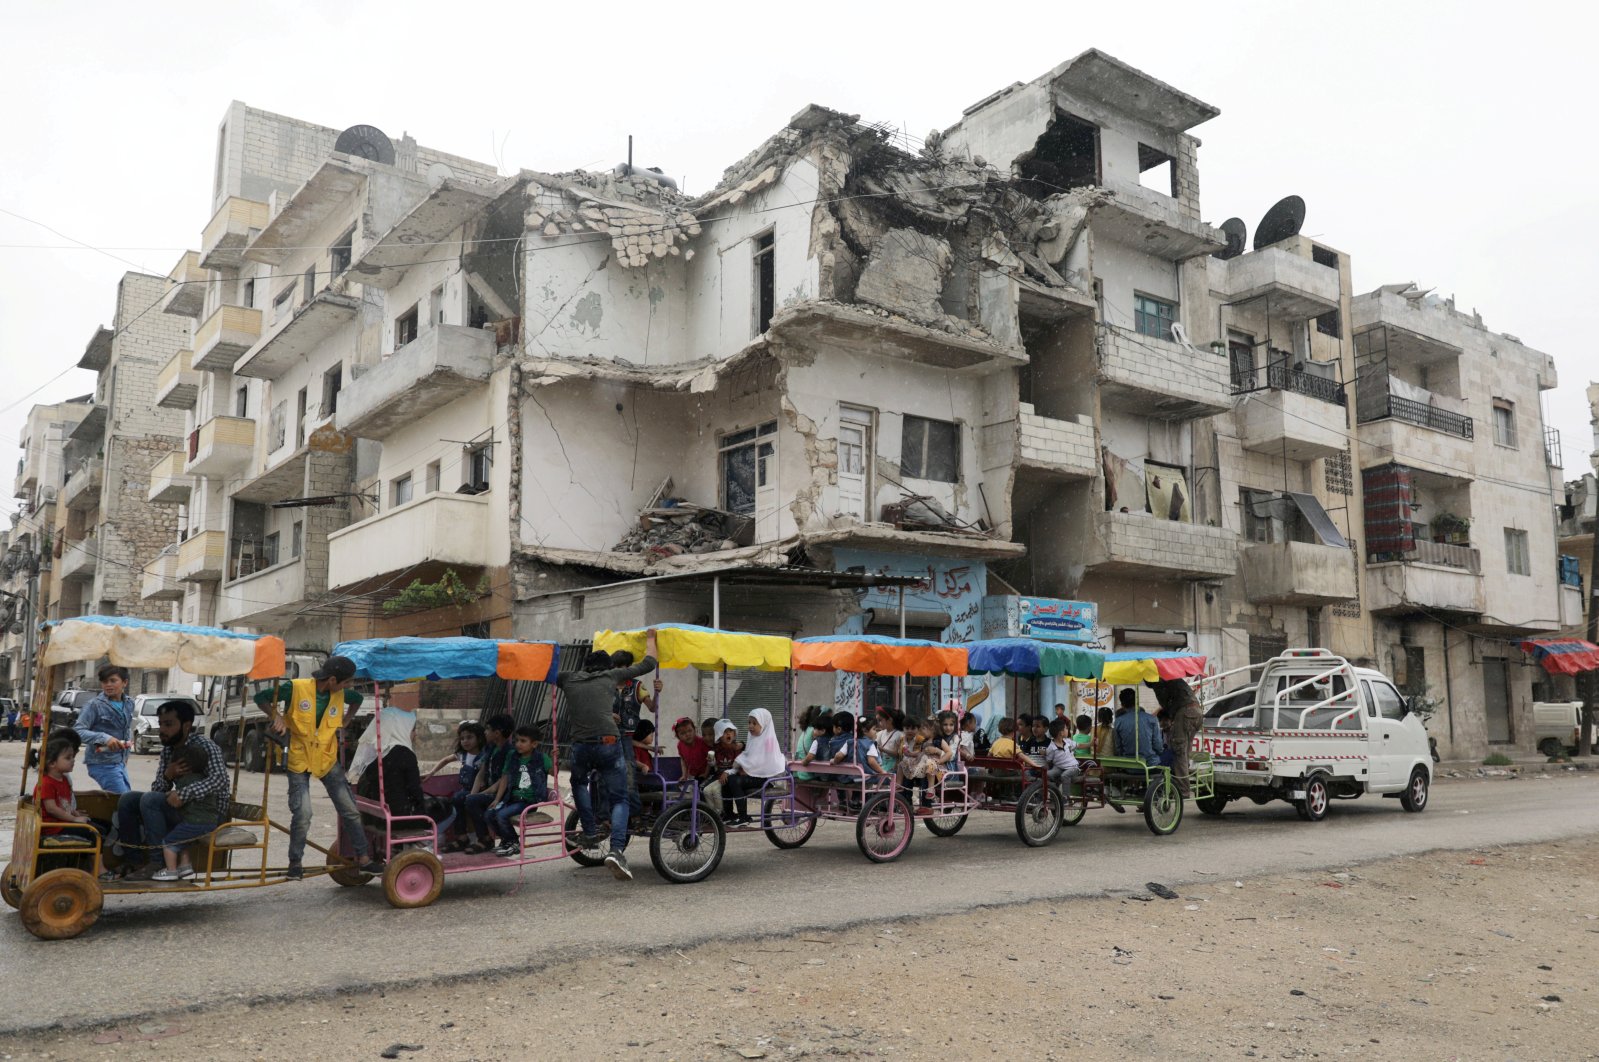 Children ride in carts past a damaged building on the first day of the Muslim holiday of Eid al-Fitr amid the global outbreak of the coronavirus, in the opposition-held Idlib city, northwest Syria, May 24, 2020. (REUTERS Photo)